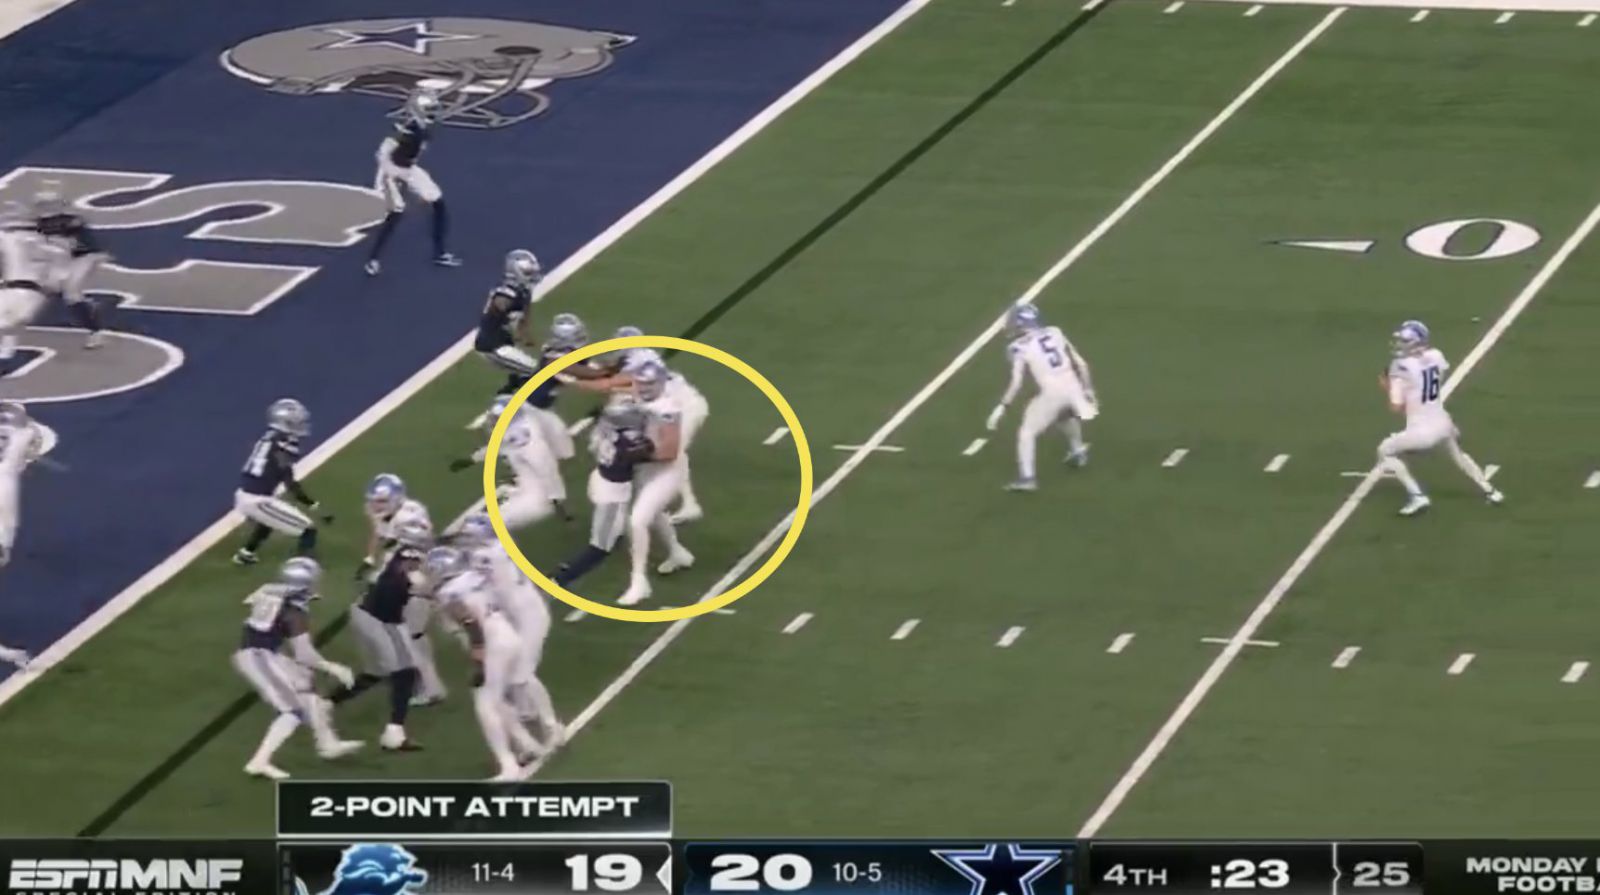 VIDEO Lions' controversial penalty on 2-point conversion leads to a Cowboys win, Referees Detroit's Dan Campbell disagree on whether Taylor Decker reported as an eligible receiver, Watch the highlights from the Week 17 game featuring the Detroit Lions and the Dallas Cowboys, Watch highlights Detroit Lions vs Dallas Cowboys, See Live Result Highlights Lions vs Cowboys, Clip highlights Week 17 Lions vs Cowboys, Highlights of Week 17 Lions vs Cowboys, Detroit Lions Highlights, Dallas Cowboys Highlights, Collection Video NFL, NFL News HOT Video, Watch Video NFL Highlights, NFL Highlights, NFL Soccer, Video Highilghts NFL Soccer, Video Week 17 Game Highlights NFL